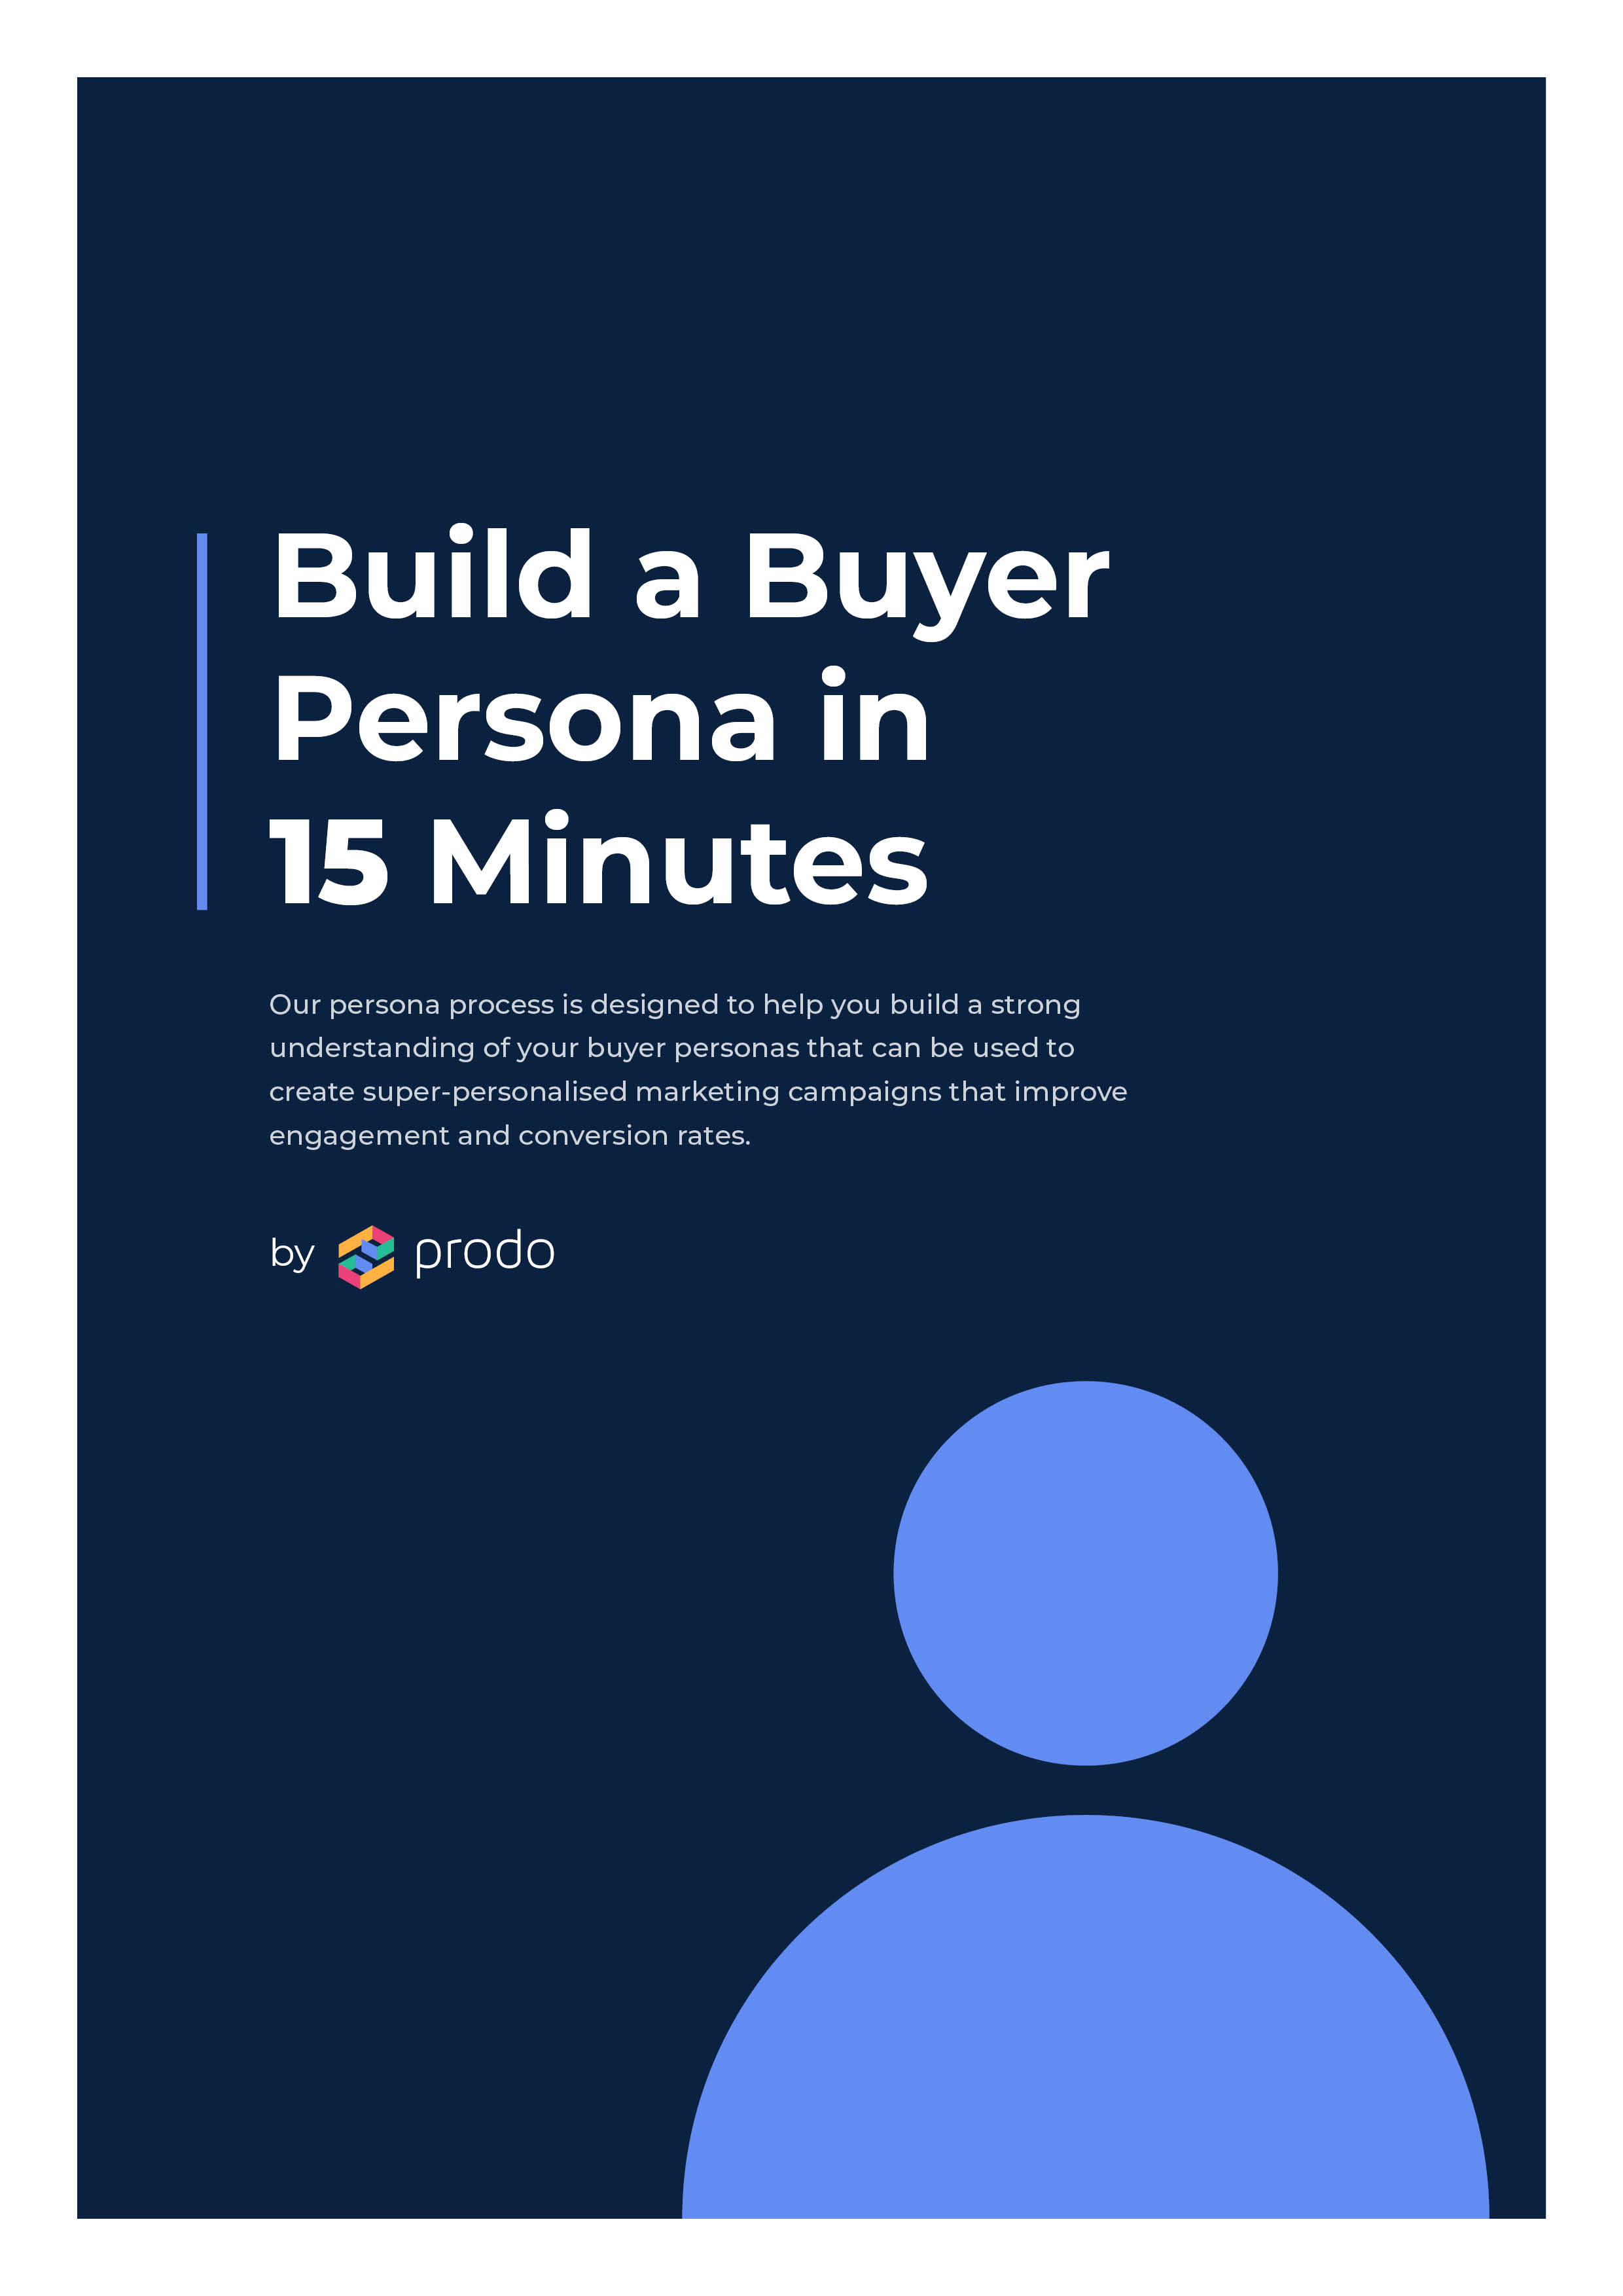 Build a Buyer Persona in 15 Minutes